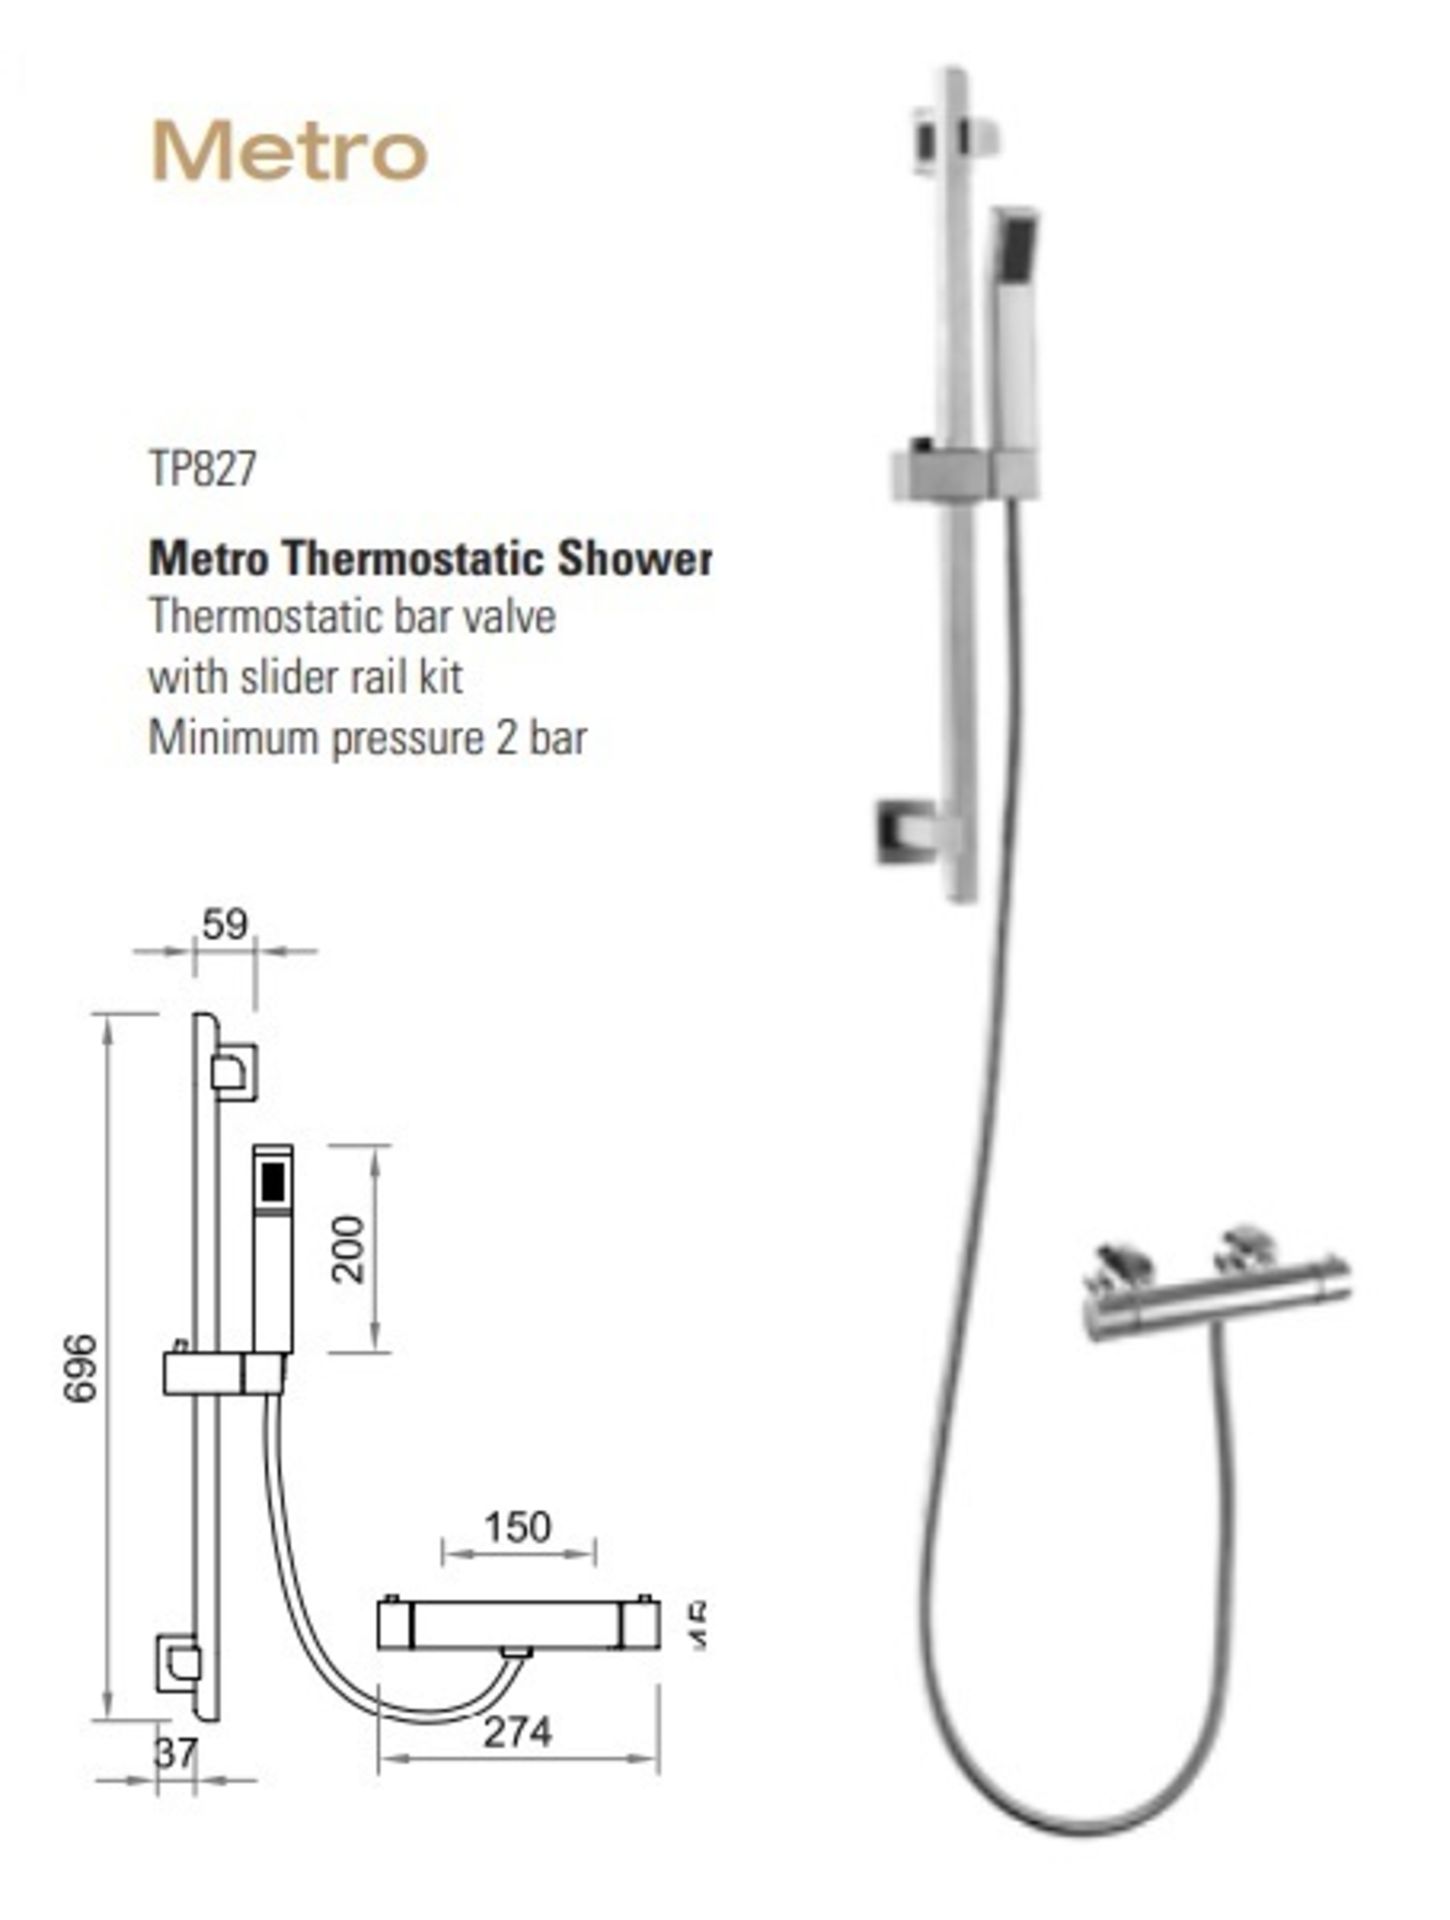 1 x Stonearth 'Metro' Stainless Thermostatic Shower Kit - Brand New & Boxed - RRP £495 - Ref: - Image 2 of 15